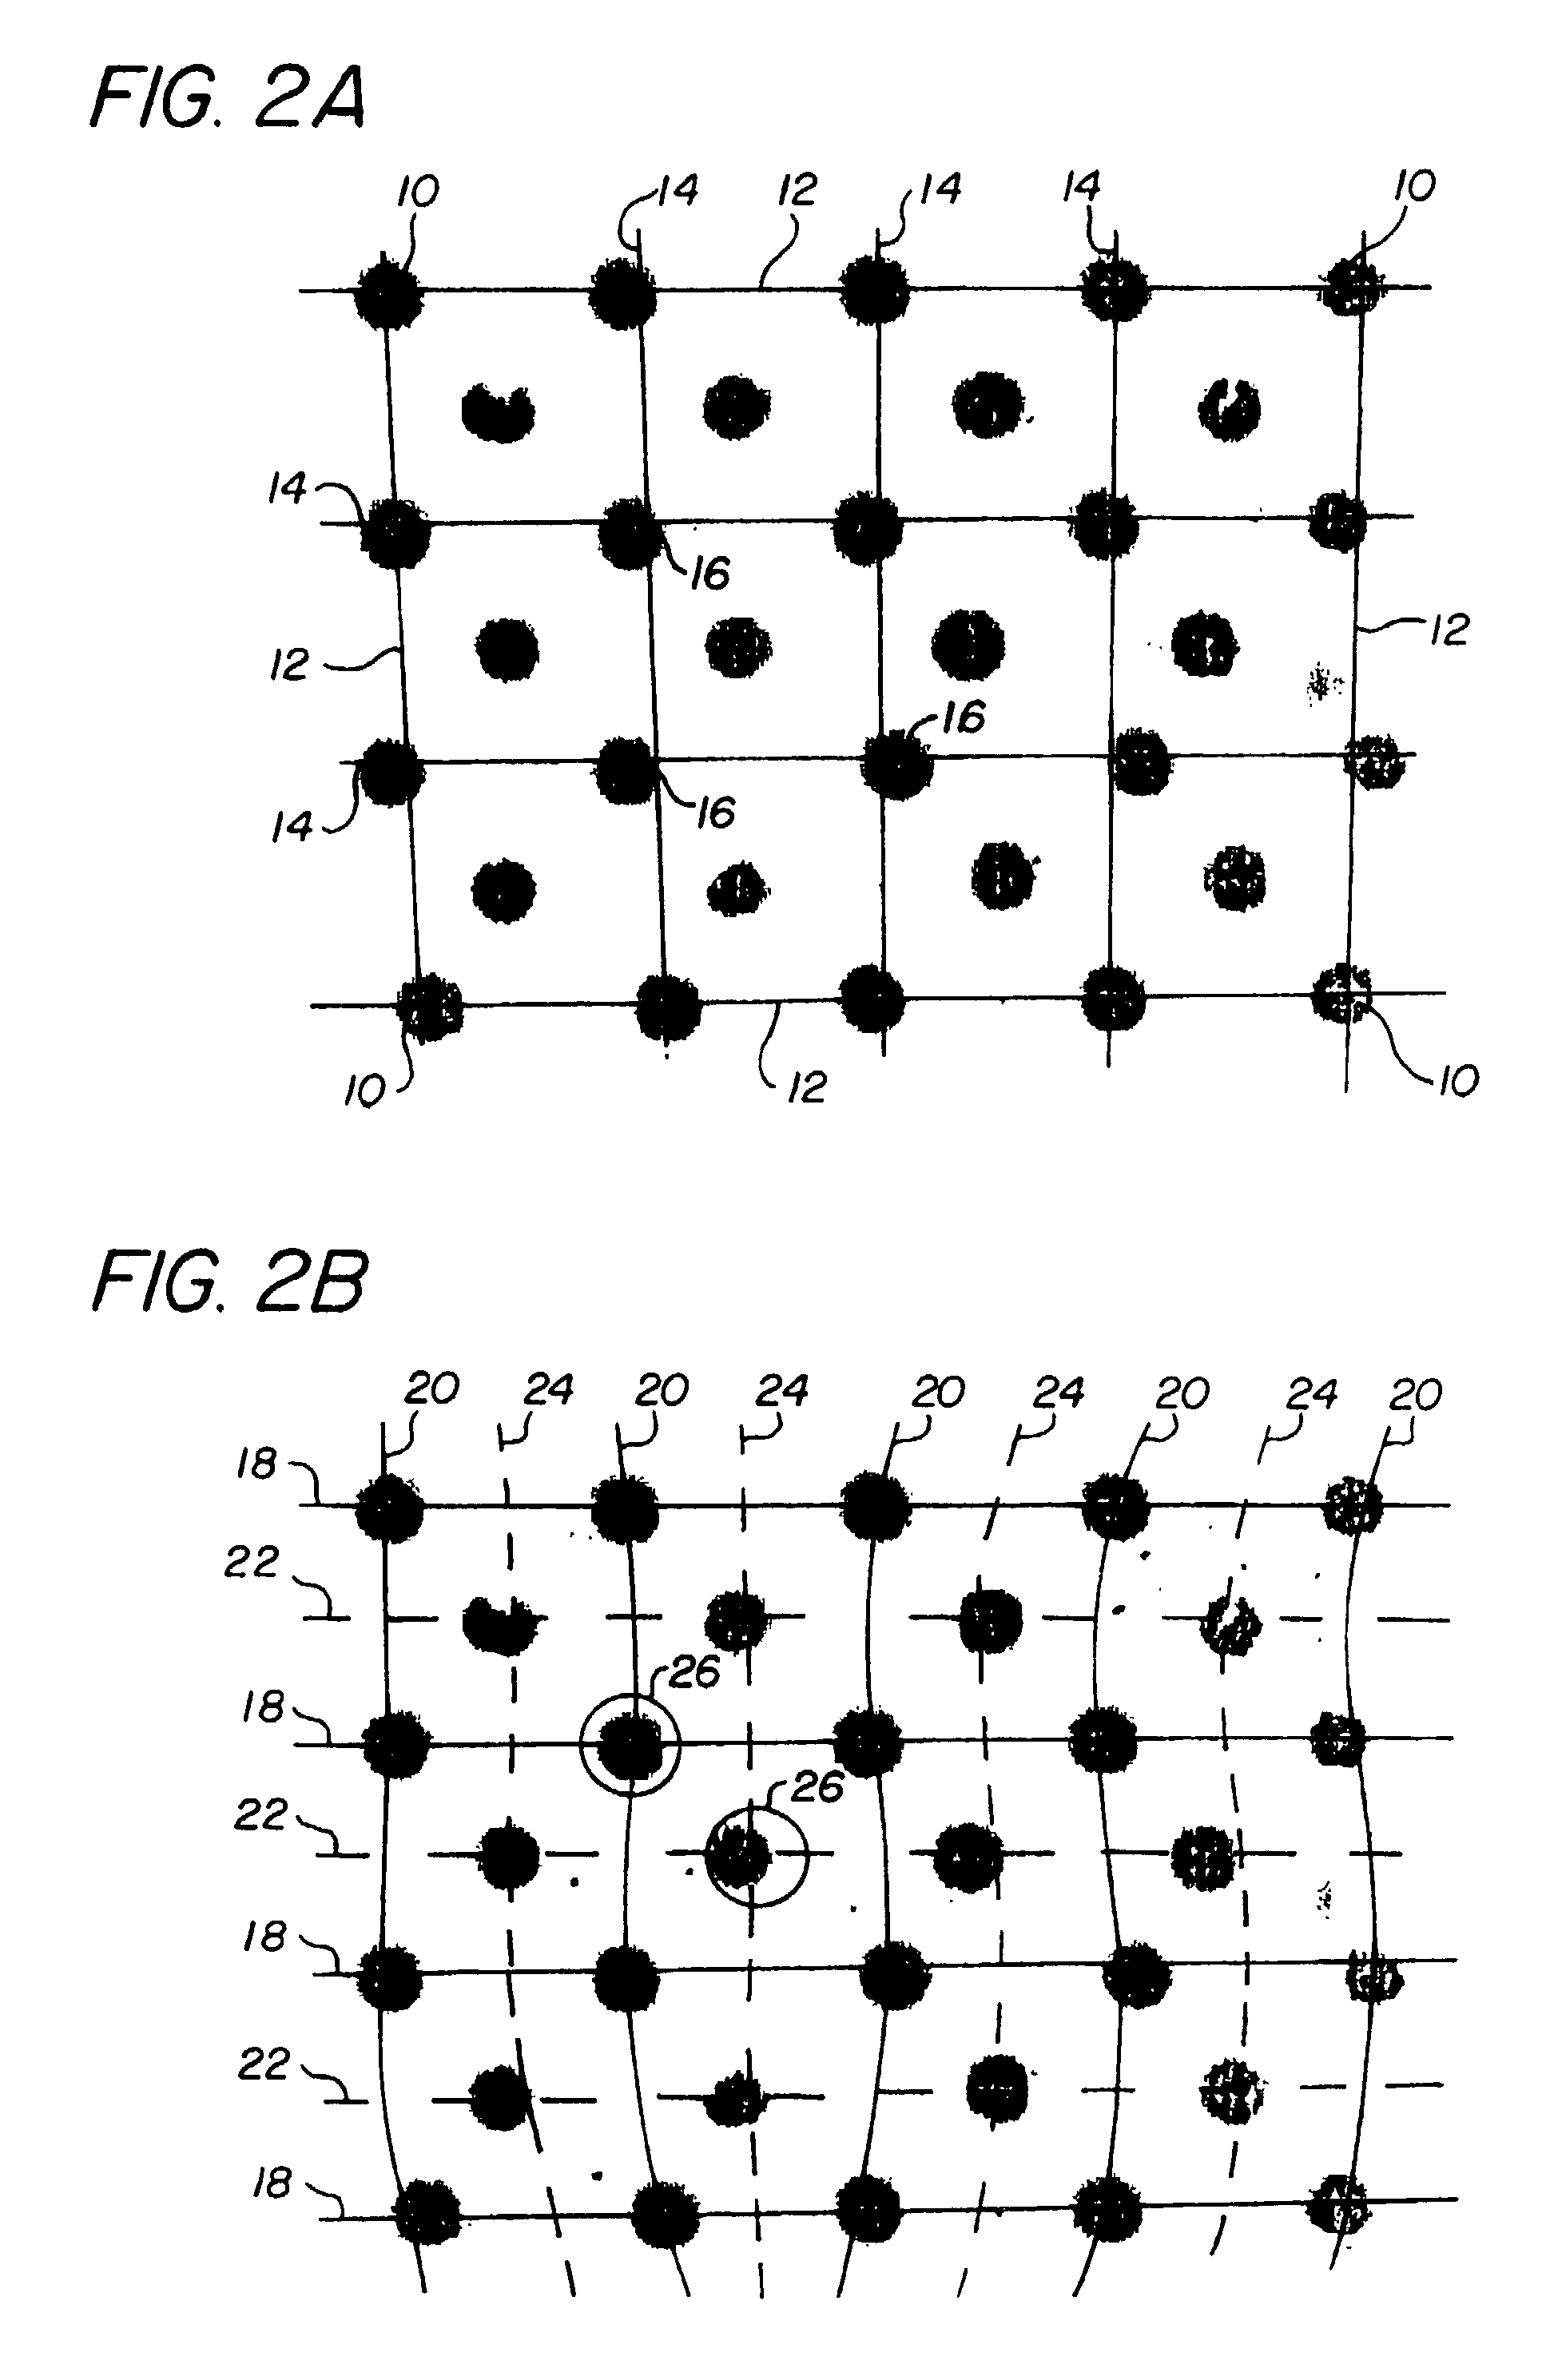 Method of extracting locations of nucleic acid array features